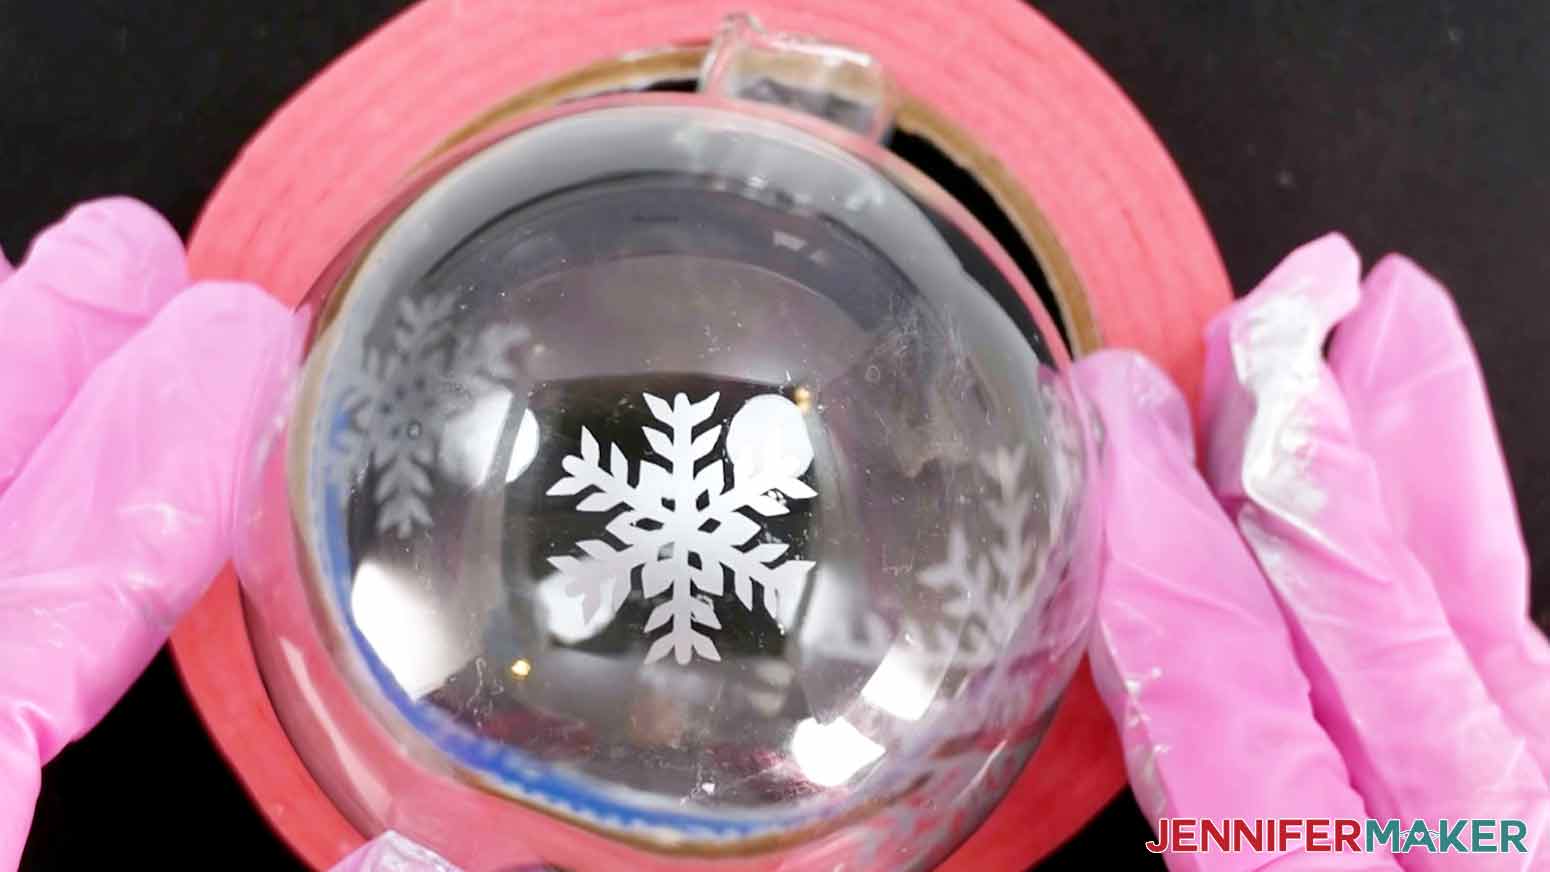 A closeup photo showing a silver colored snowflake on an etched glass ornament